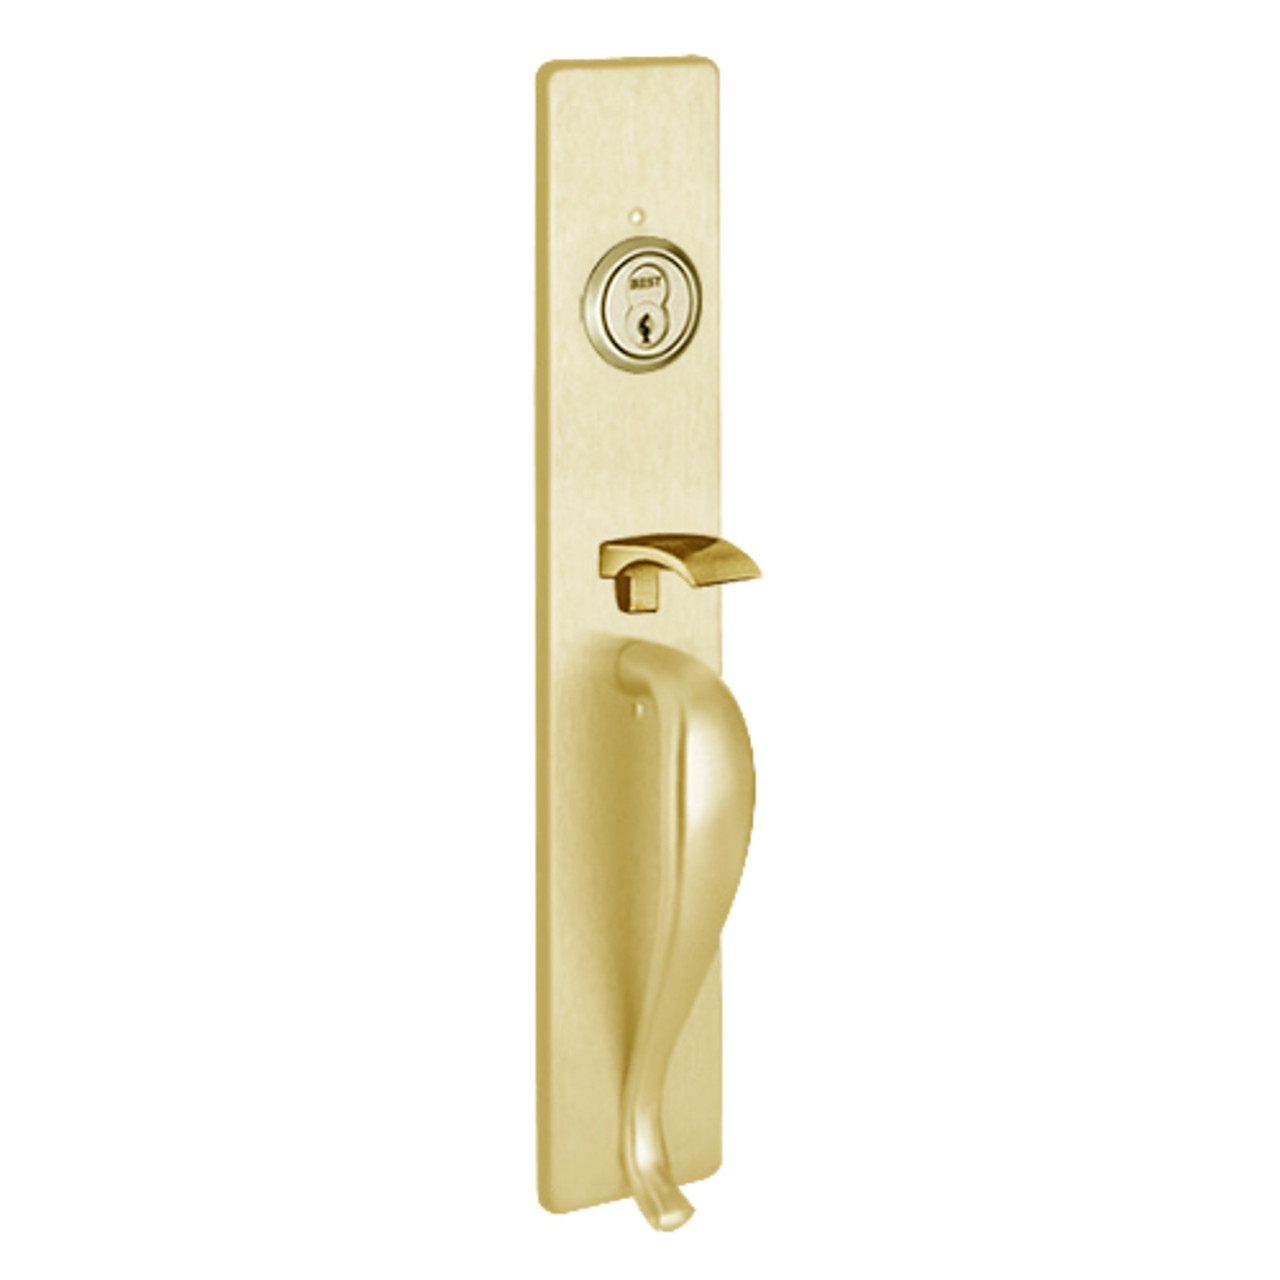 Y1715B-605 PHI Thumb Piece Always Active with B Design Pull for Olympian Series Device in Bright Brass Finish